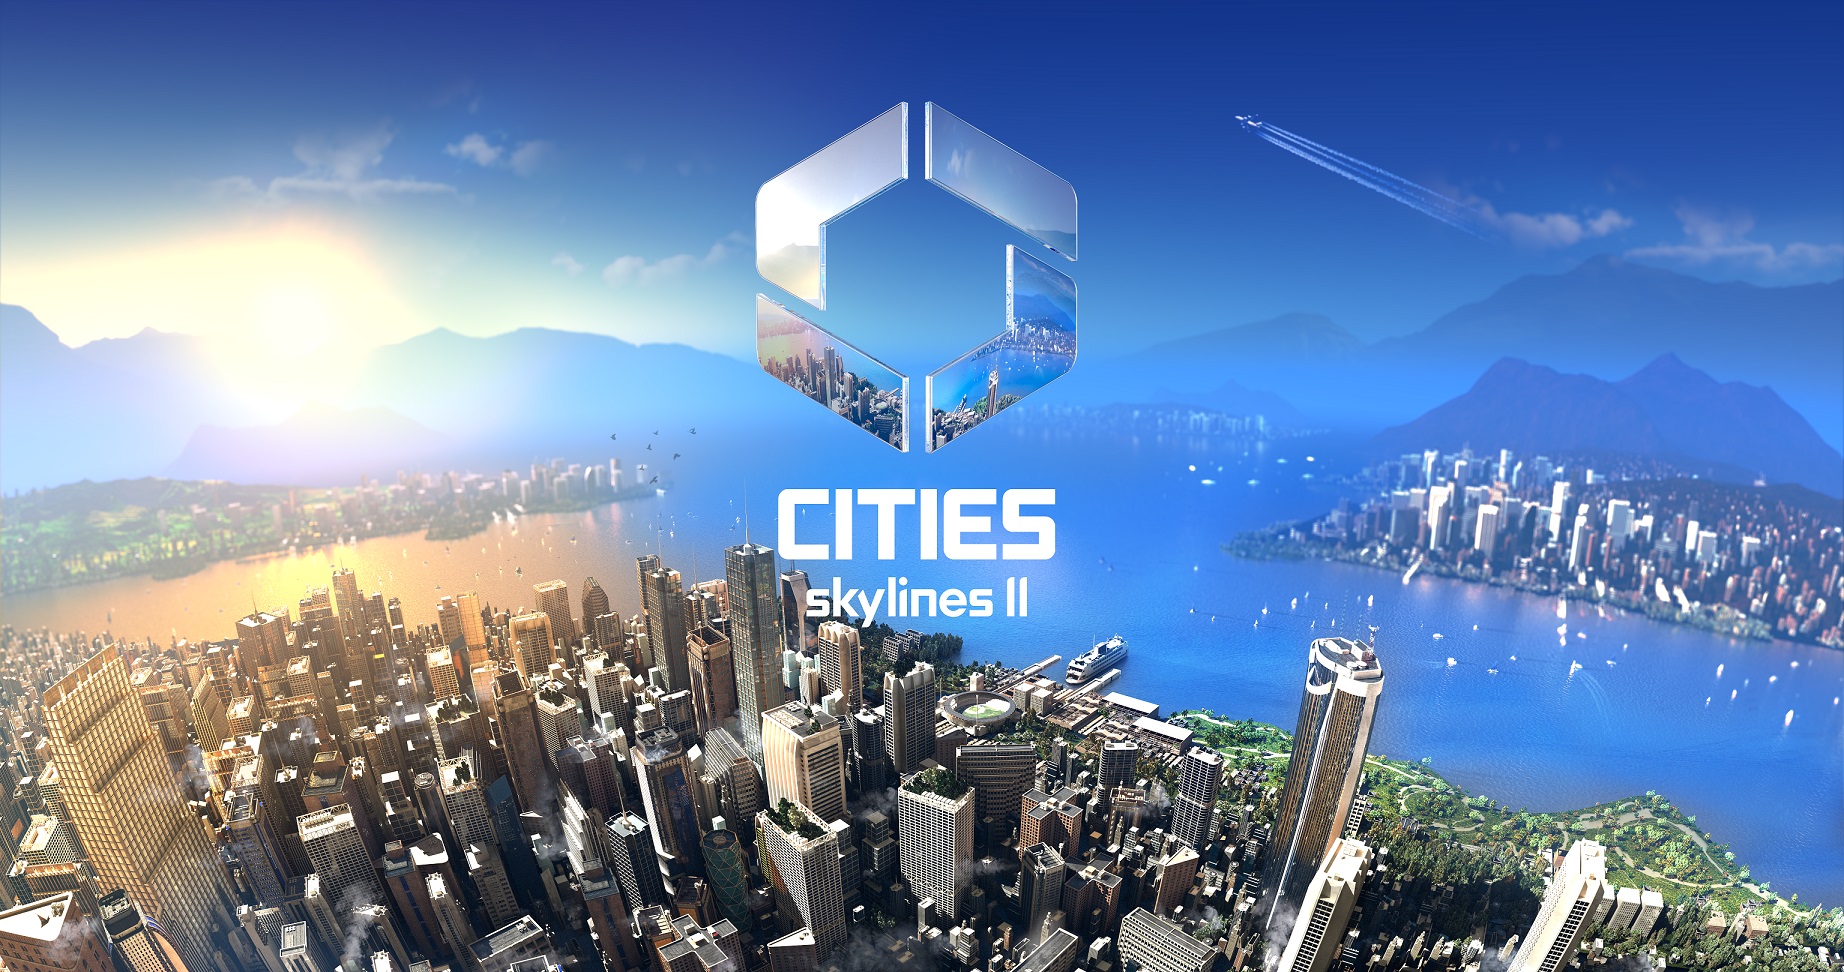 Paradox Announcement Show reveals several new games, including Cities: Skylines 2